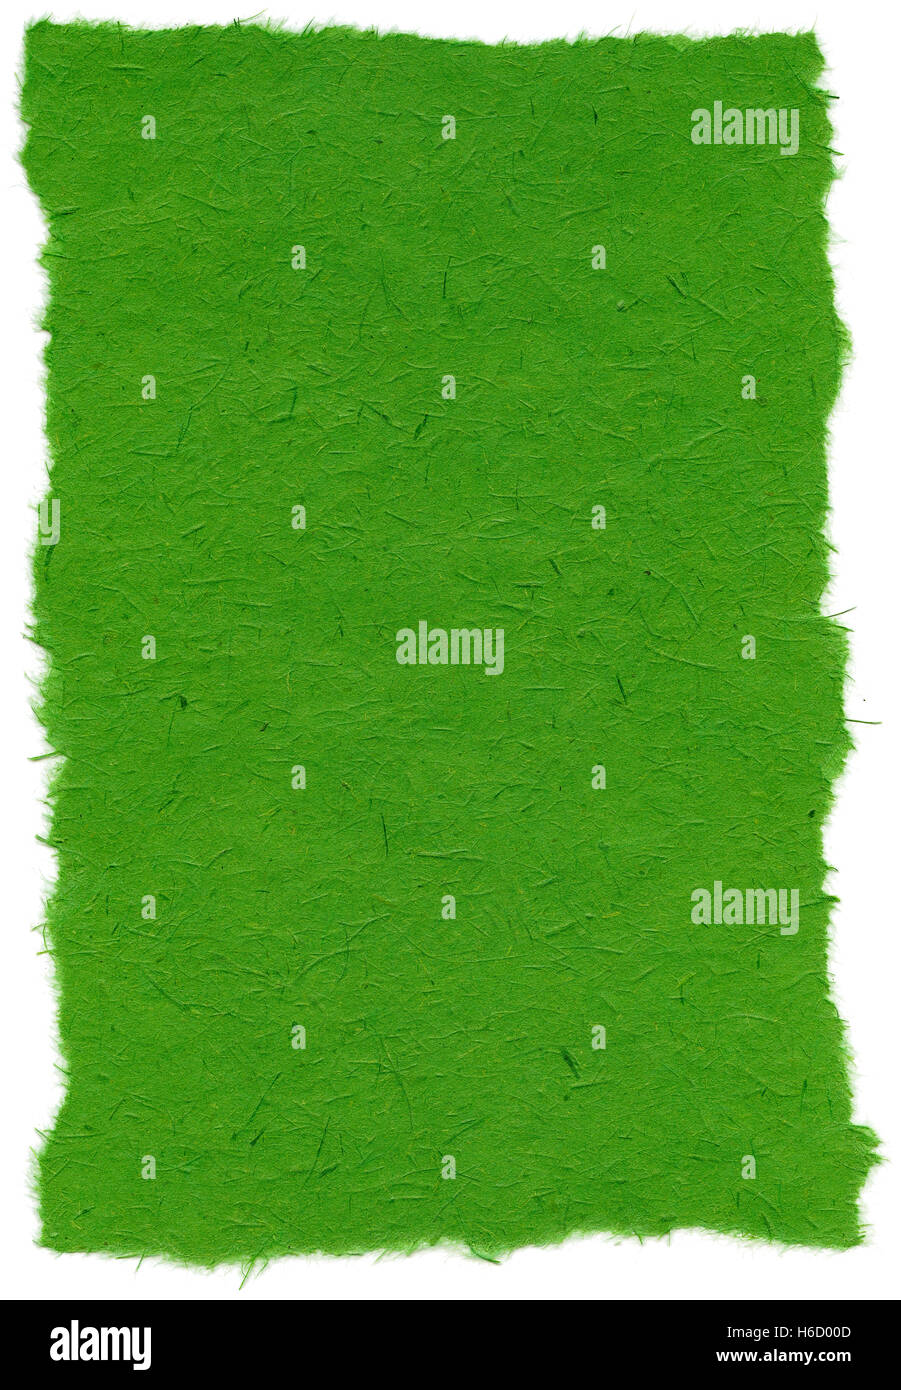 Texture of India green rice paper with torn edges. Isolated on white background. Scanned at 1200dpi using a professional scanner Stock Photo